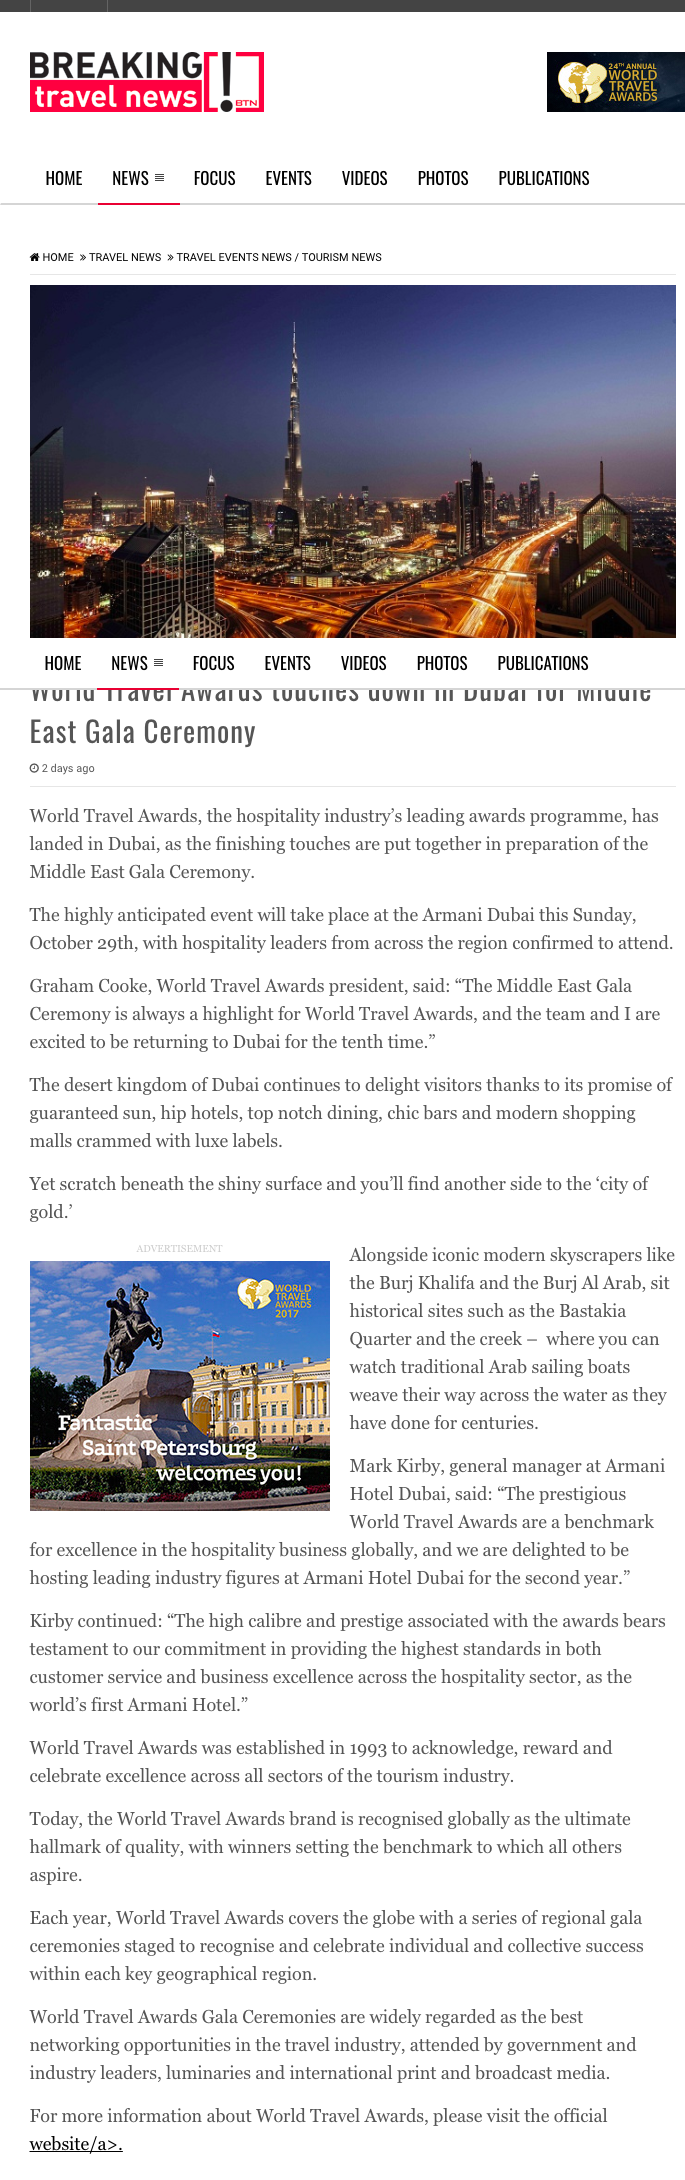 World Travel Awards touches down in Dubai for Middle East Gala Ceremony